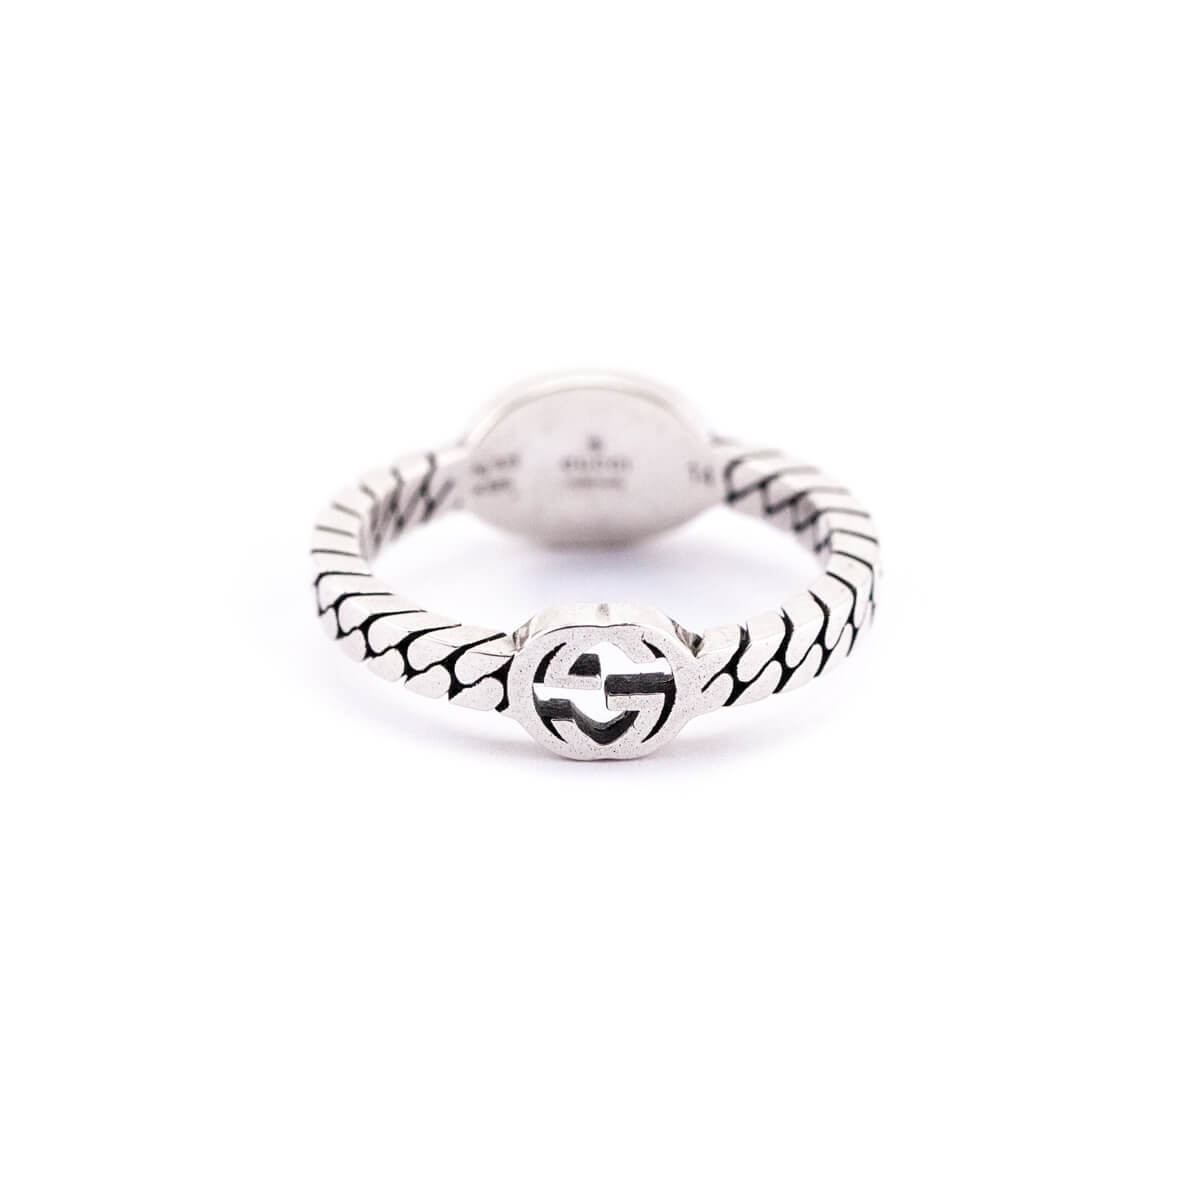 Gucci Sterling Silver Interlocking G Ring Size 6.75 - Love that Bag etc - Preowned Authentic Designer Handbags & Preloved Fashions